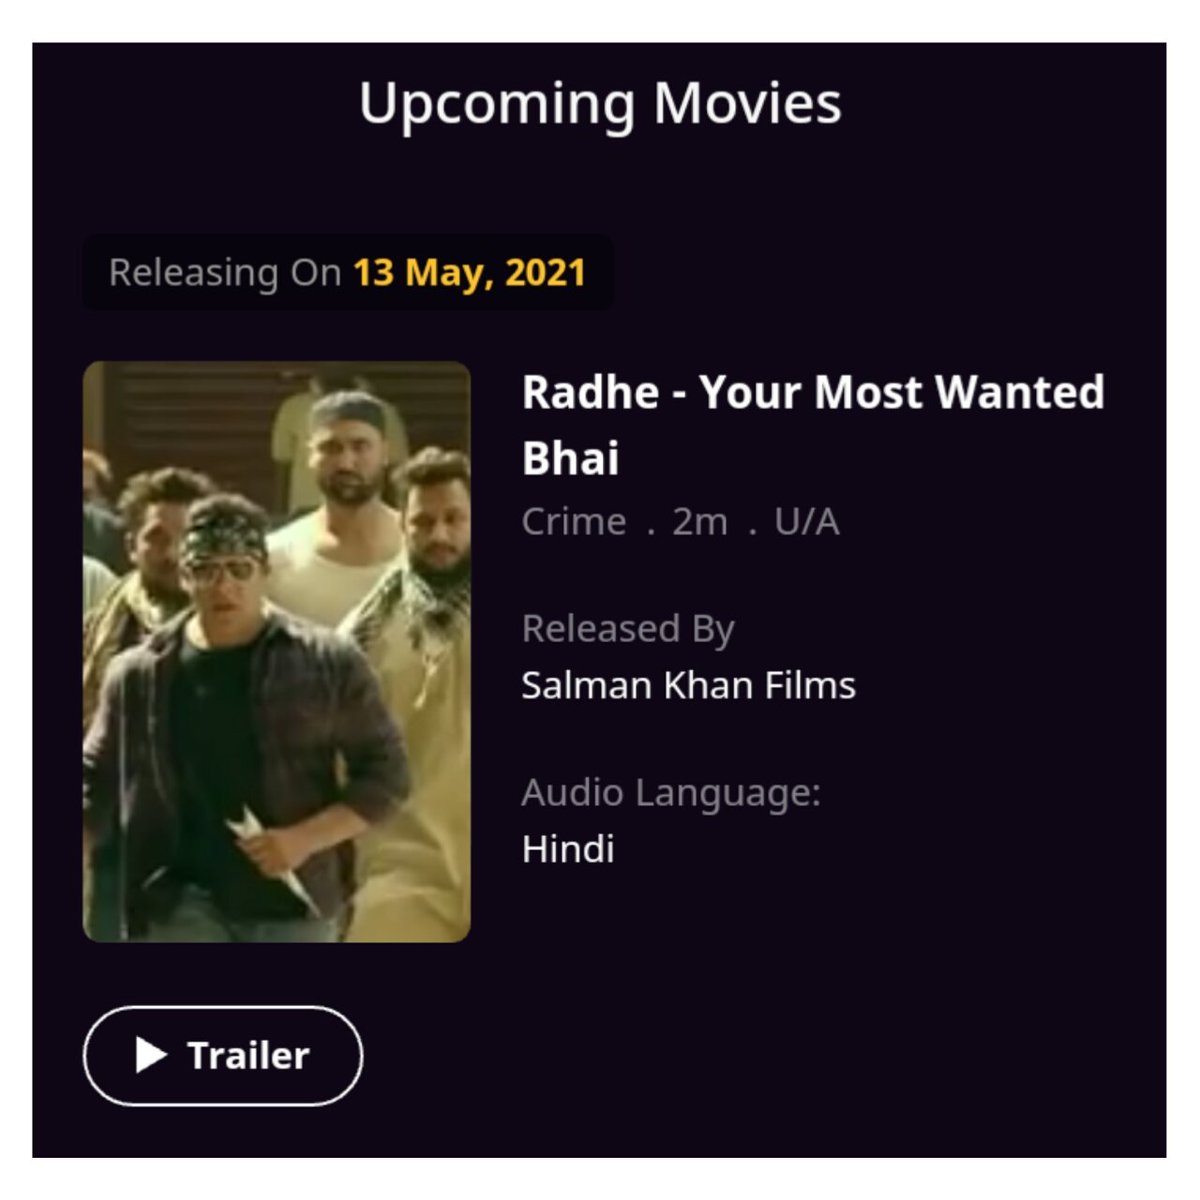 Method 2 - For ₹249 On Zeeplex ZEEPLEX is Available On Both TV & On ZEE5 App & Website, Pehle App/Website Ki Baat Karte HainFans Who Want To Rent  #Radhe On ZeePlex on Mobile/Laptop Have To Wait For 13th May, Bcoz You Can't Rent It In advance as Per  @zeeplexofficial (4/n)